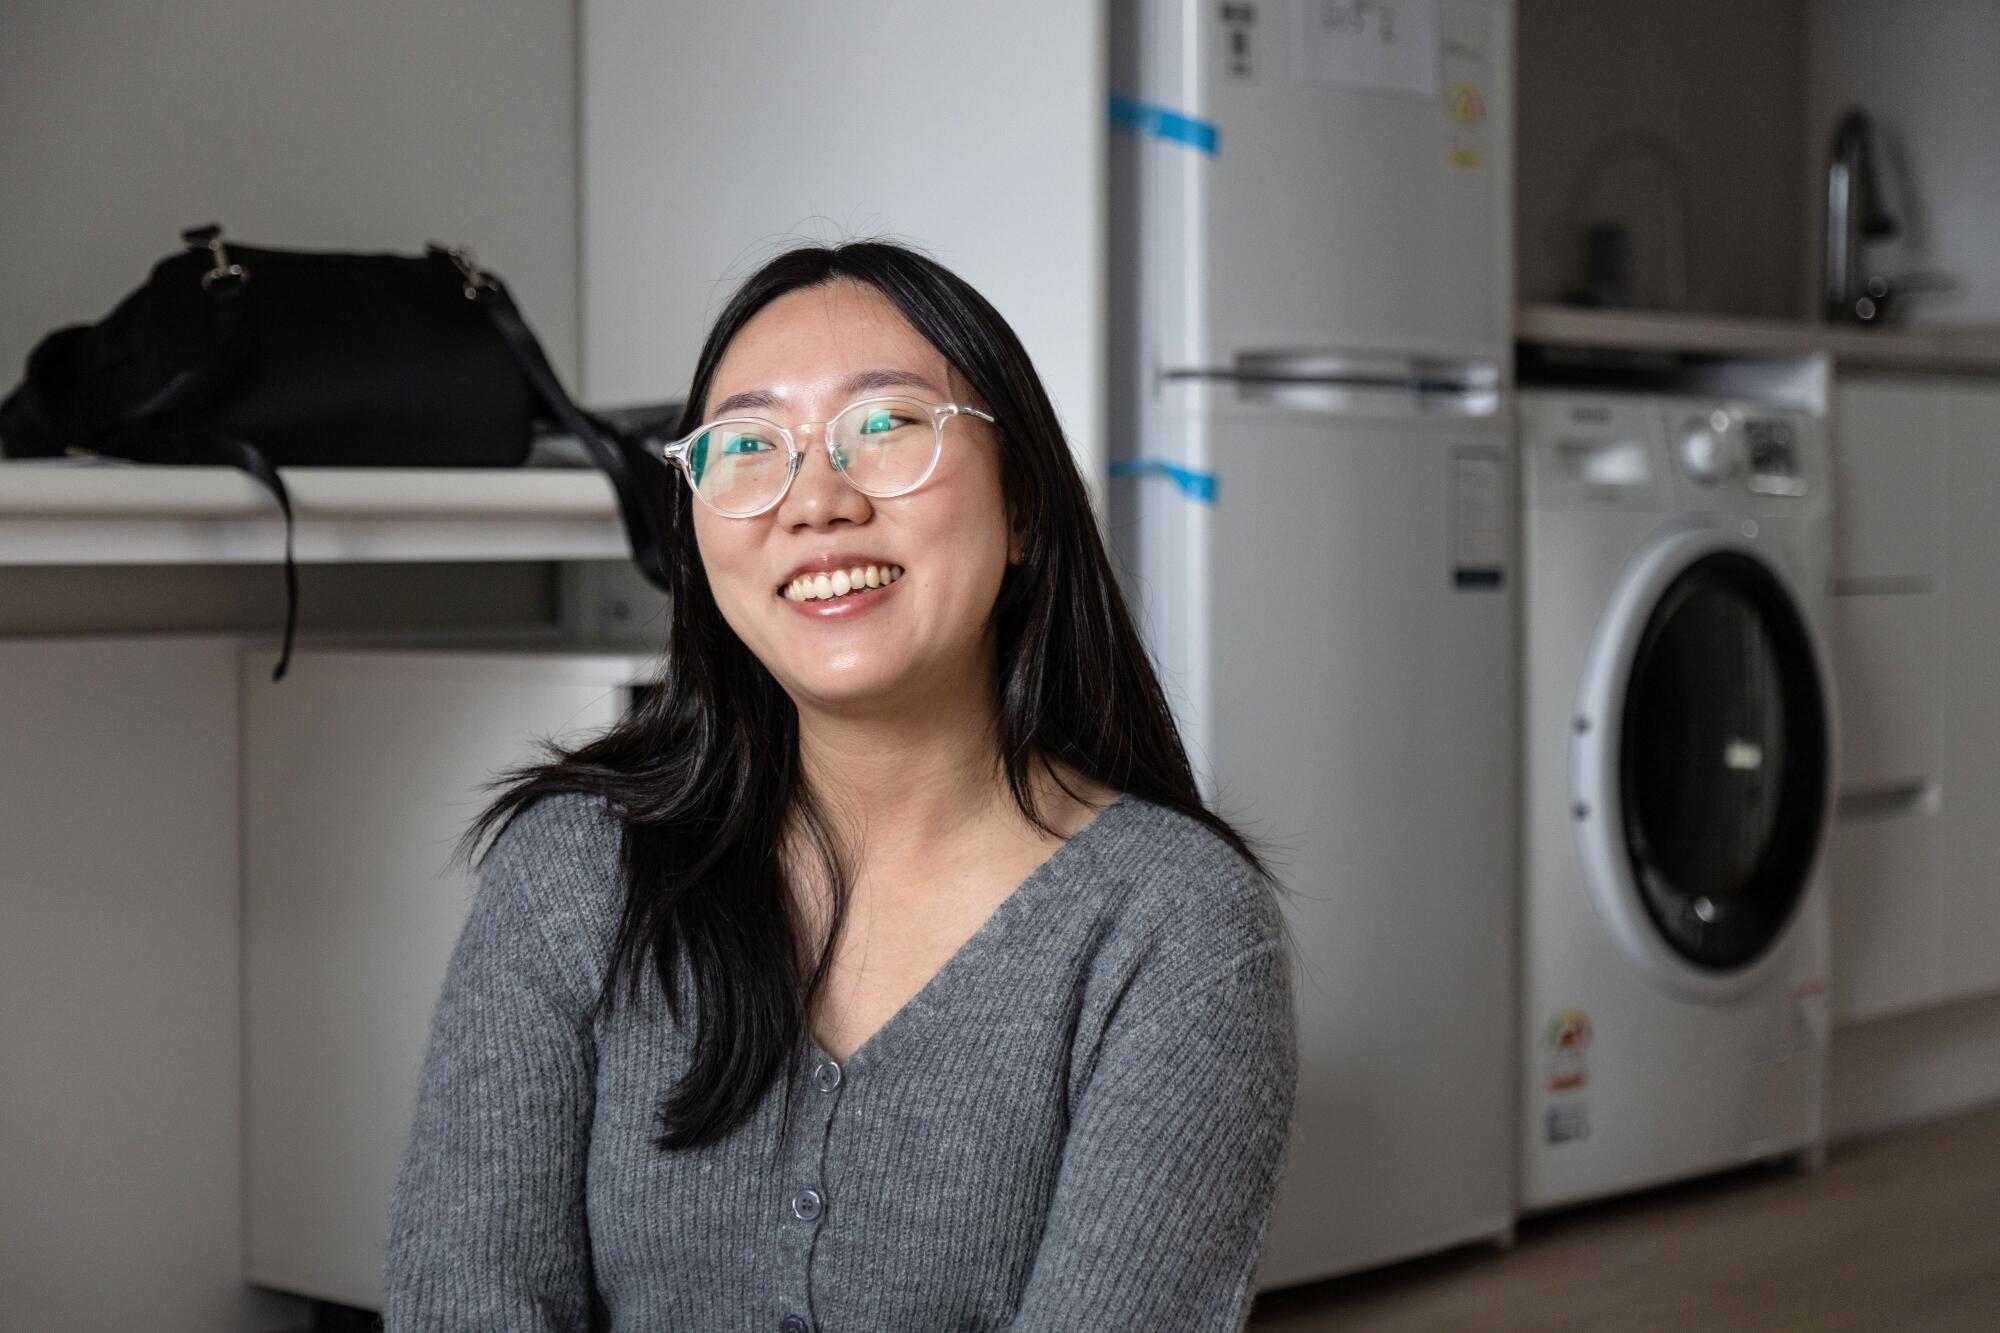 Kim Do-yeon sits and smiles in a room that has appliances in the background.